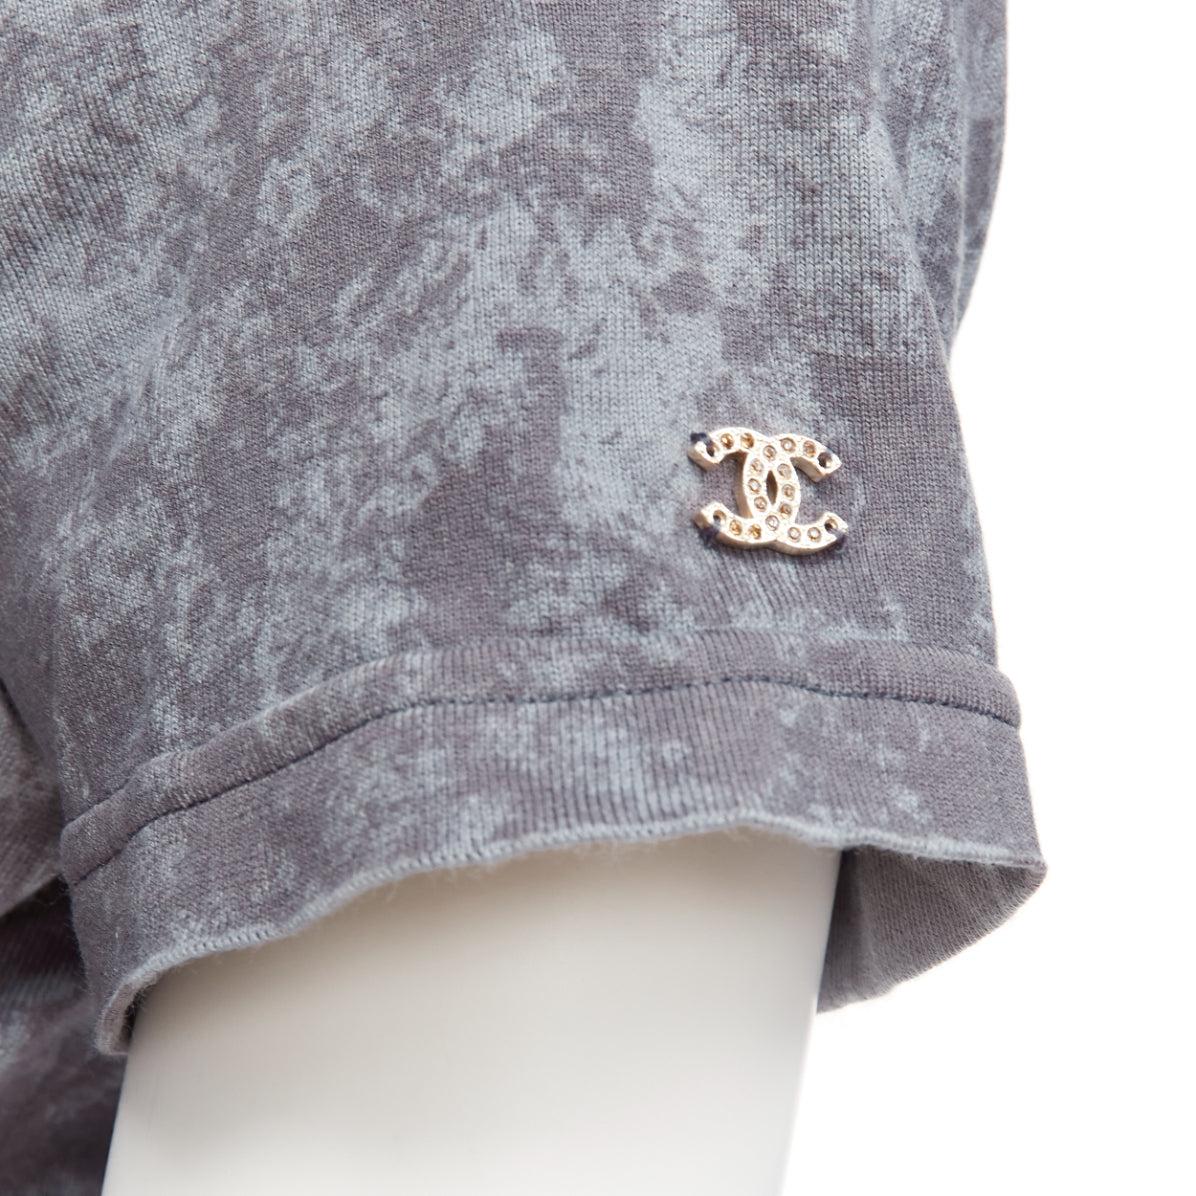 CHANEL 2021 grey rope logo embroidery tie cropped tshirt FR34 XS
Reference: AAWC/A00792
Brand: Chanel
Designer: Virginie Viard
Collection: 2021
Material: Cotton
Color: Grey
Pattern: Tie Dye
Closure: Self Tie
Extra Details: Self tie at waist.
Made